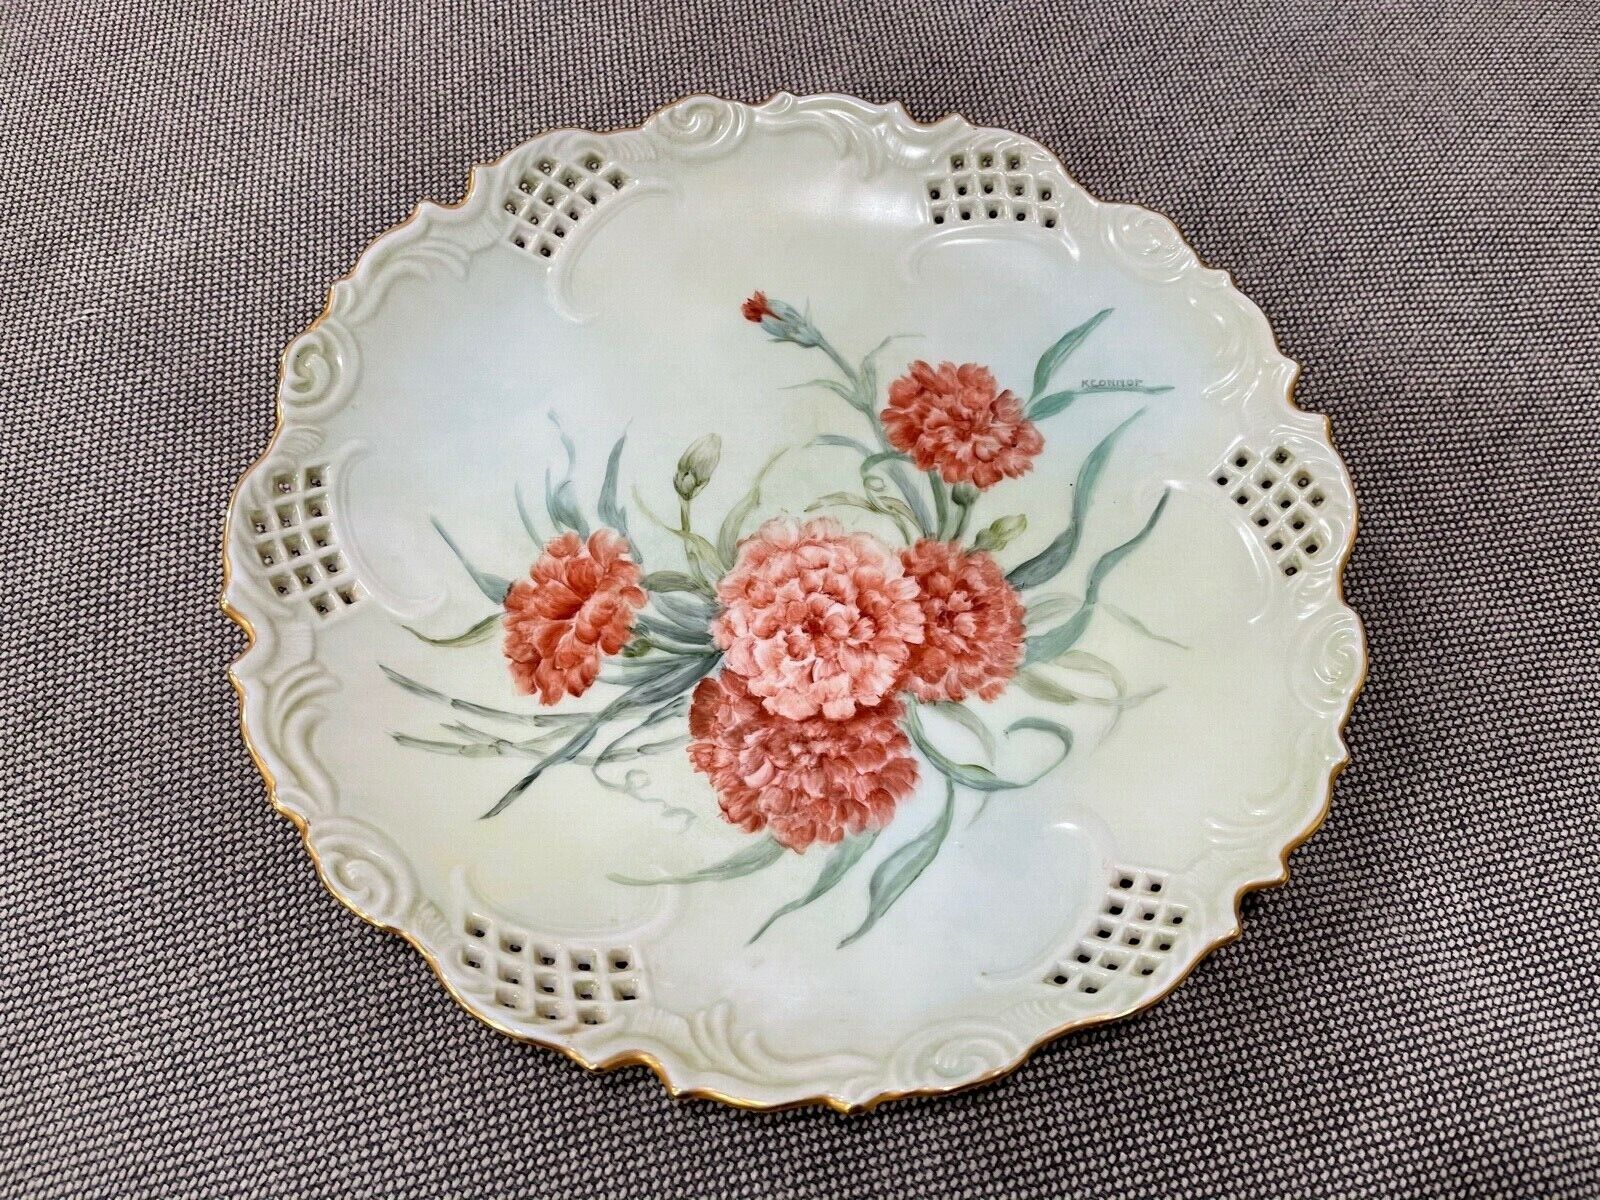 Antique Pierced Porcelain Cabinet Plate w/ Red Flowers Signed K. Connor